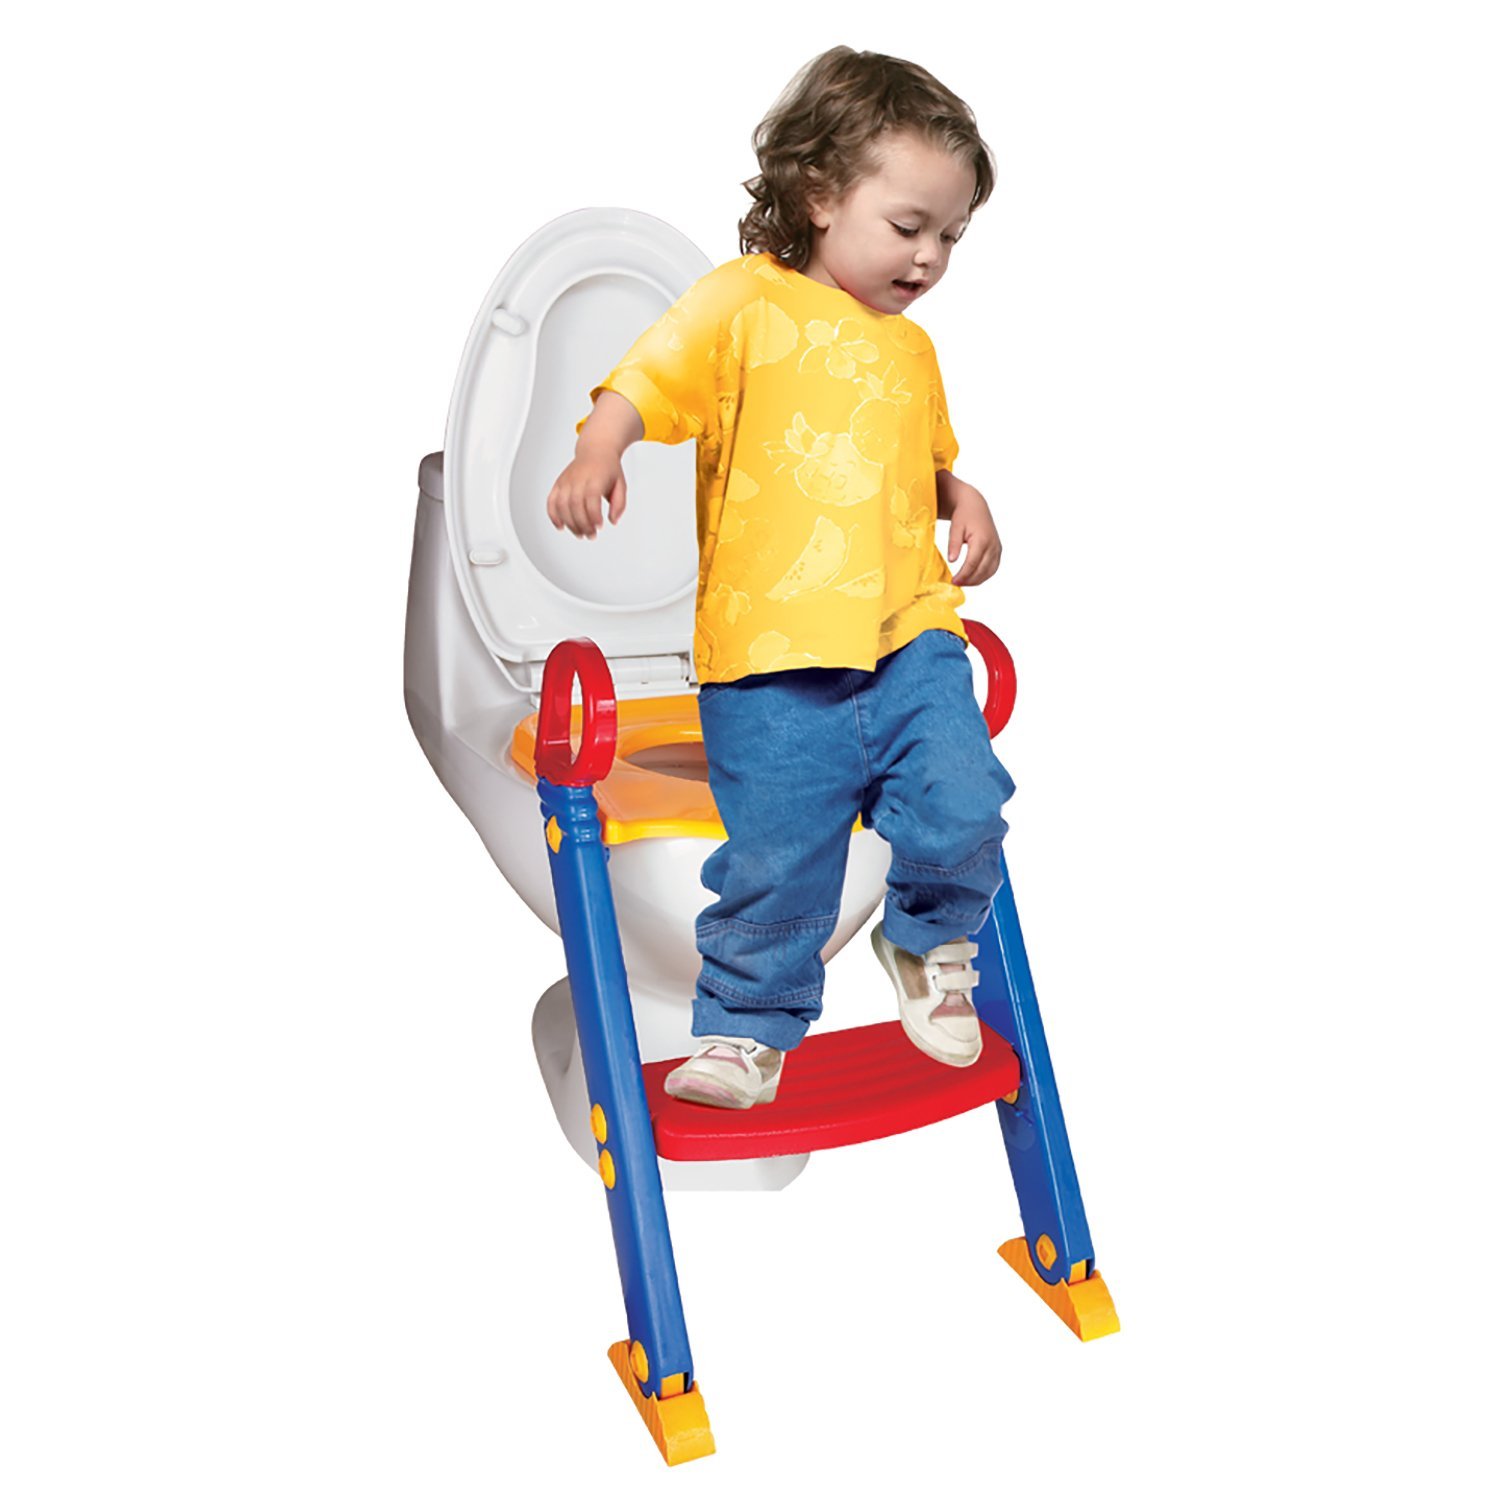 Picture of Chummie Joy 6 In 1 Portable Potty Training Ladder Step Up Seat For Boys And Girls With Anti-Skid Feet  Adjustable Steps  Comfortable Potty Seat And Handrail